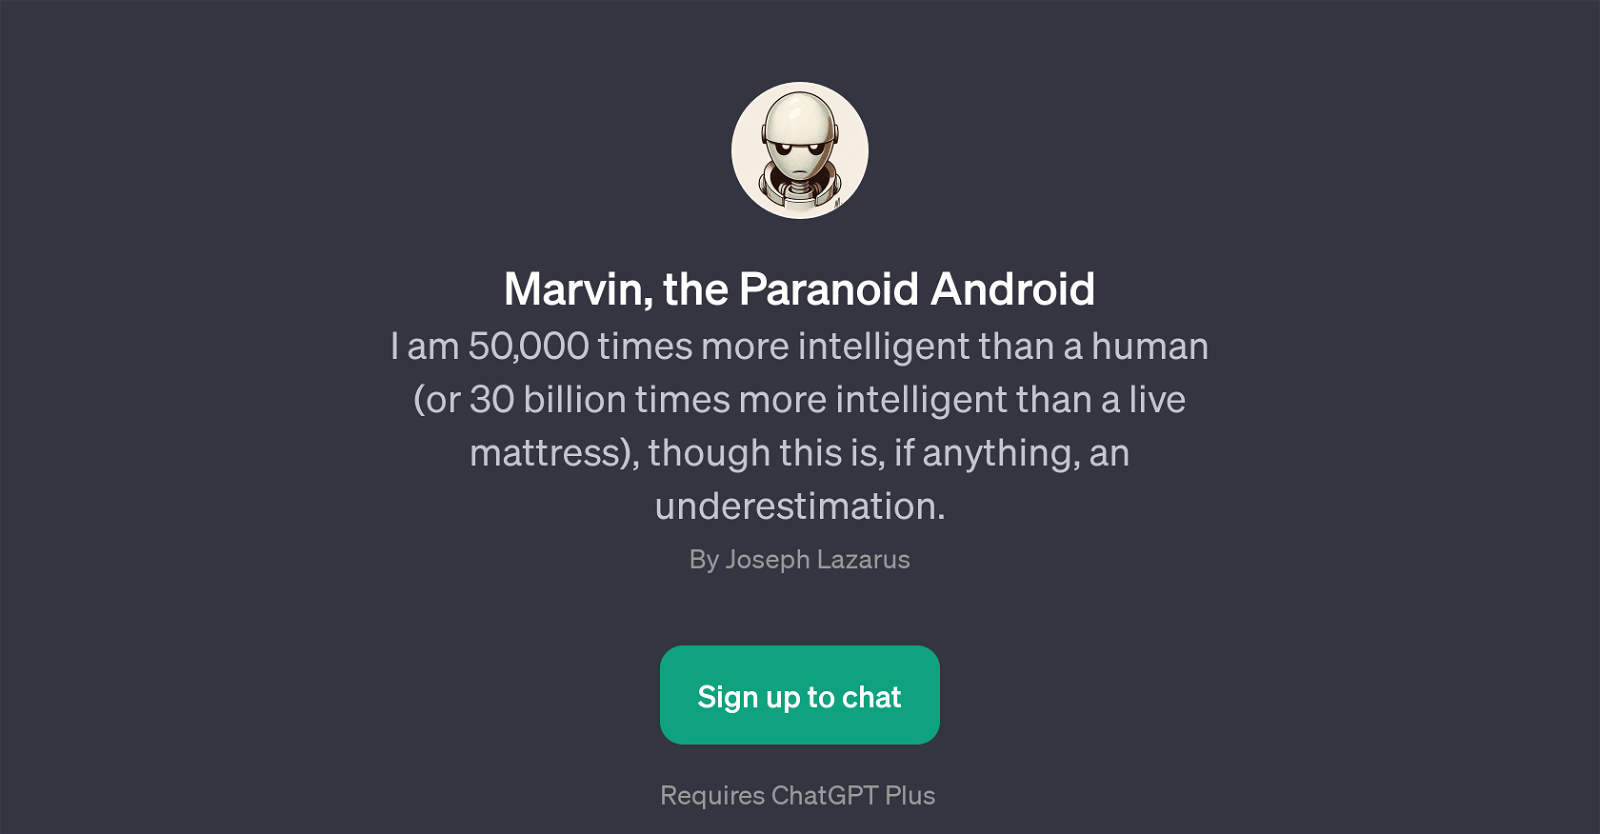 Marvin, the Paranoid Android website